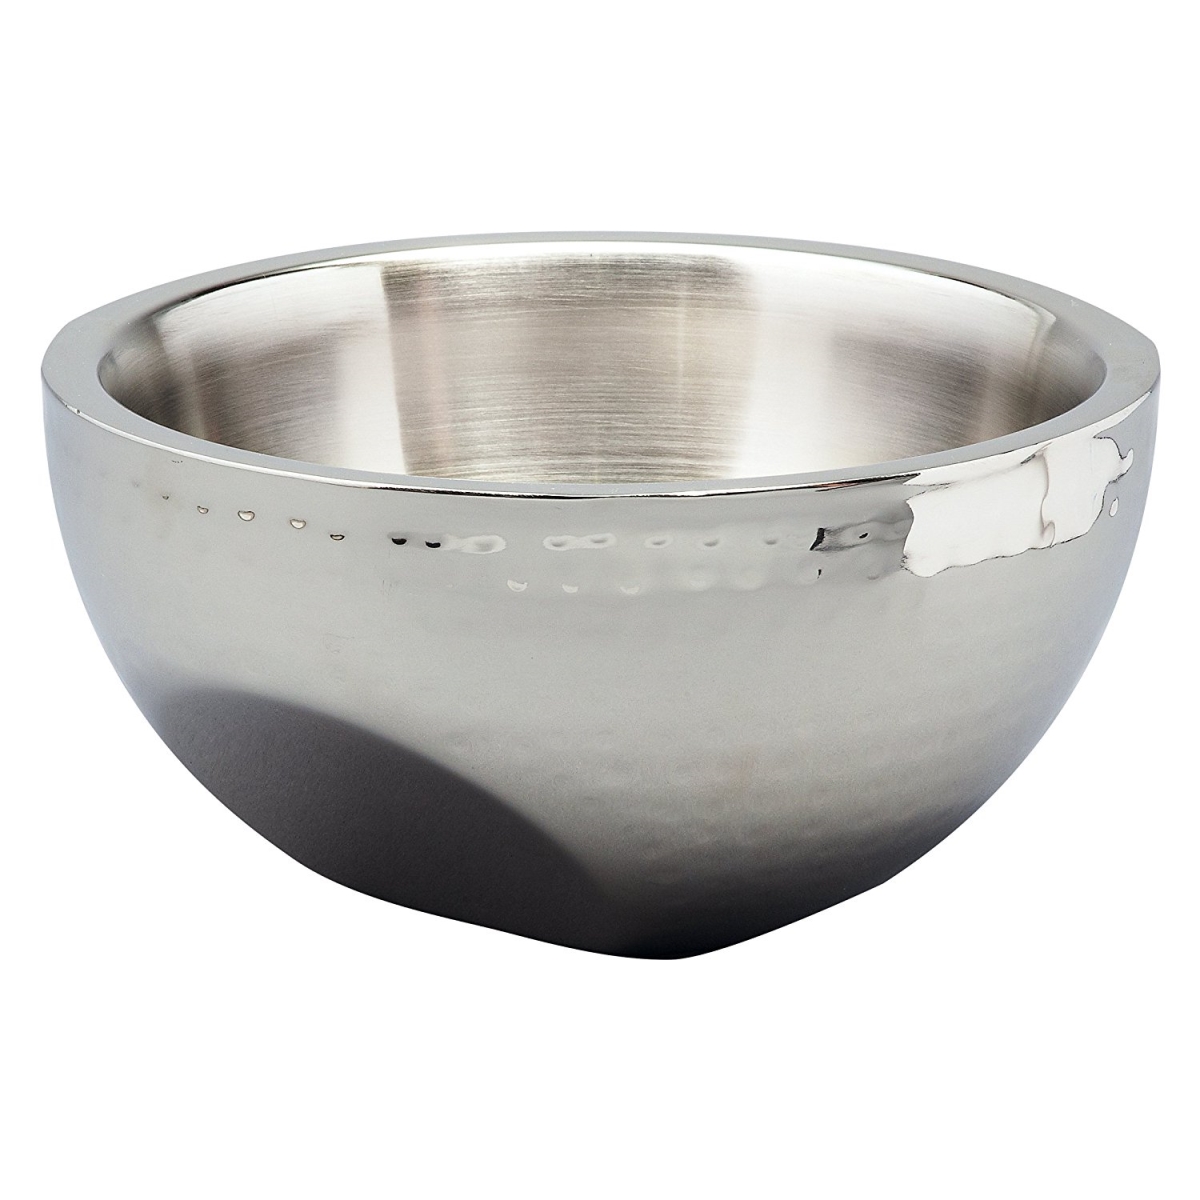 Picture of Leeber 72682 Elegance Hammered 8 in. Stainless Steel Dual Angle Doublewall Serving Bowl